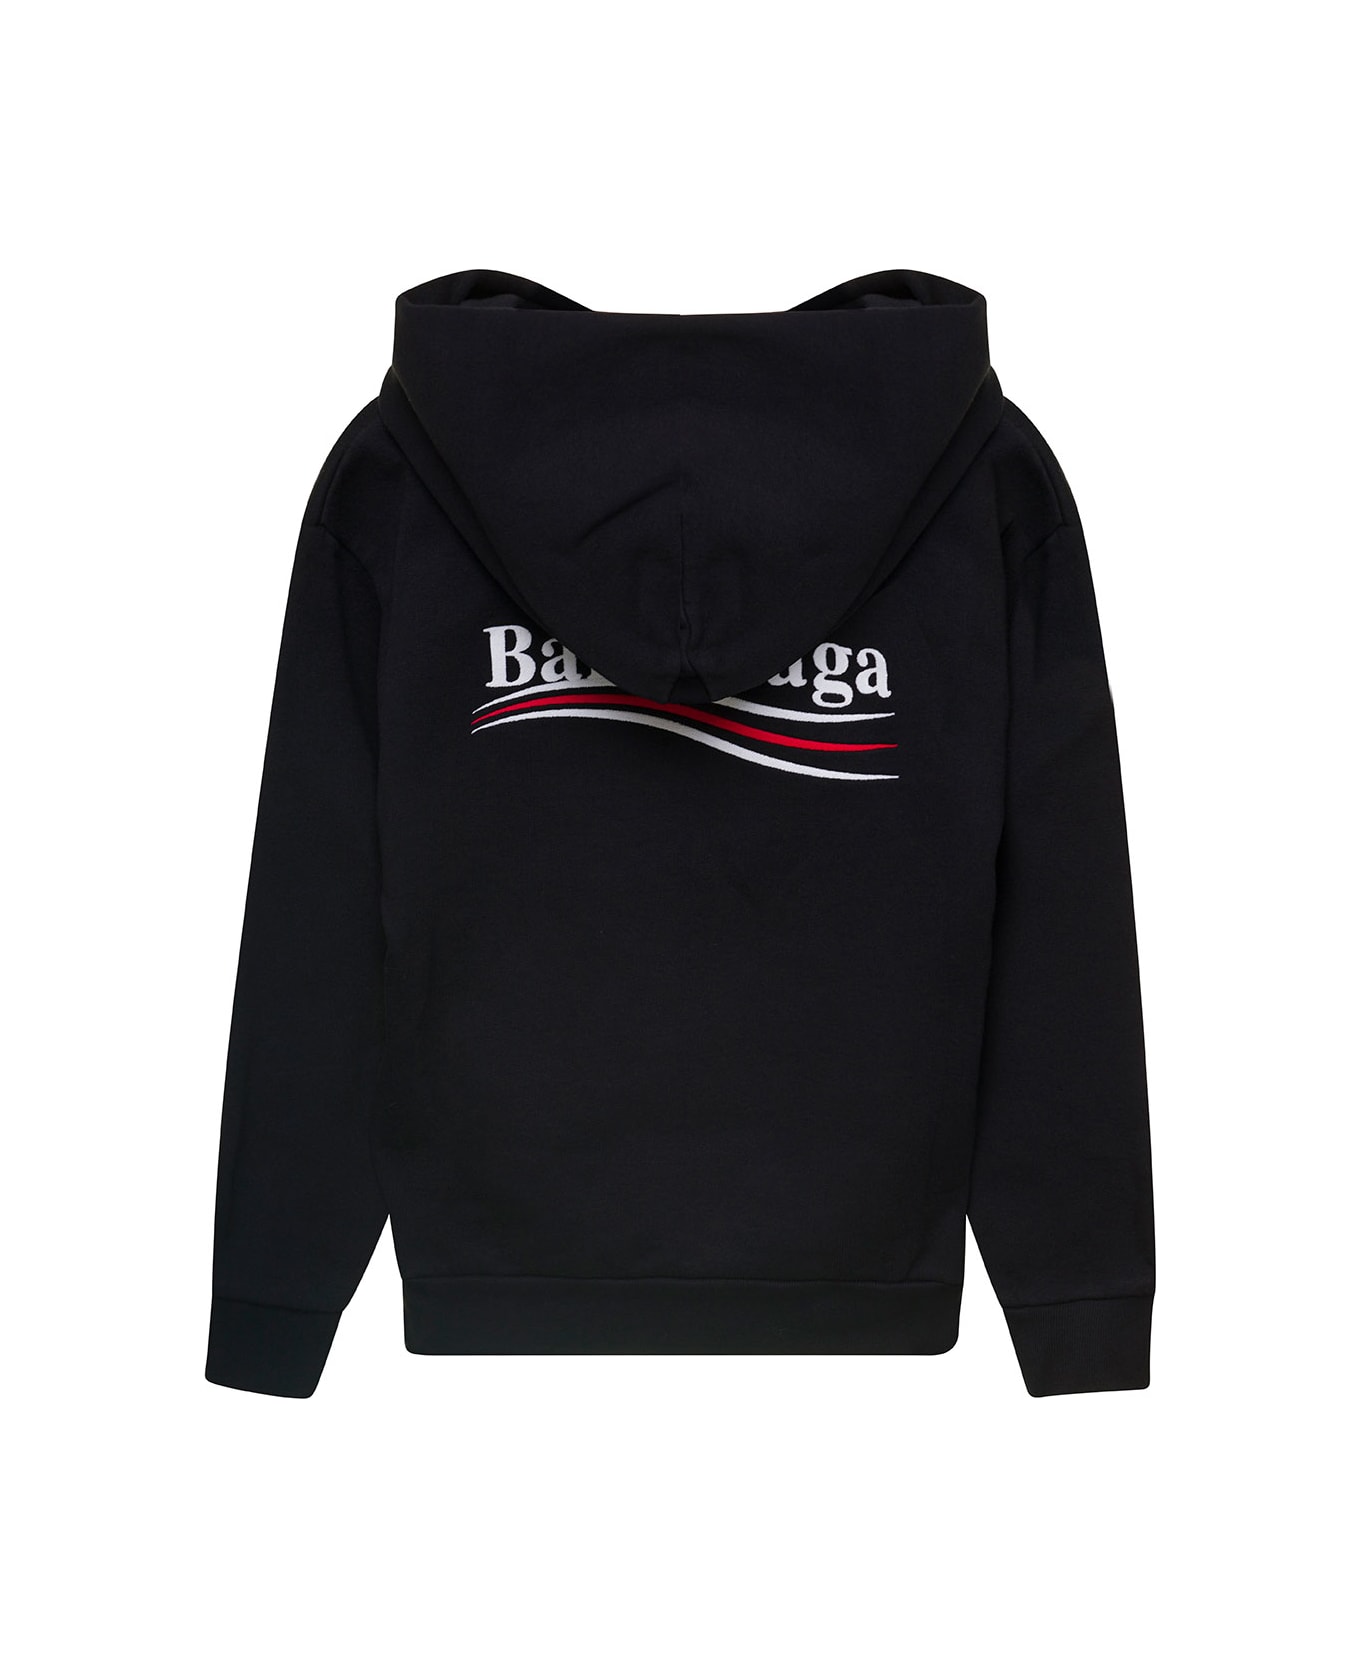 Balenciaga Black Hoodie With Logo Print On The Front And Back In Cotton Girl - Black